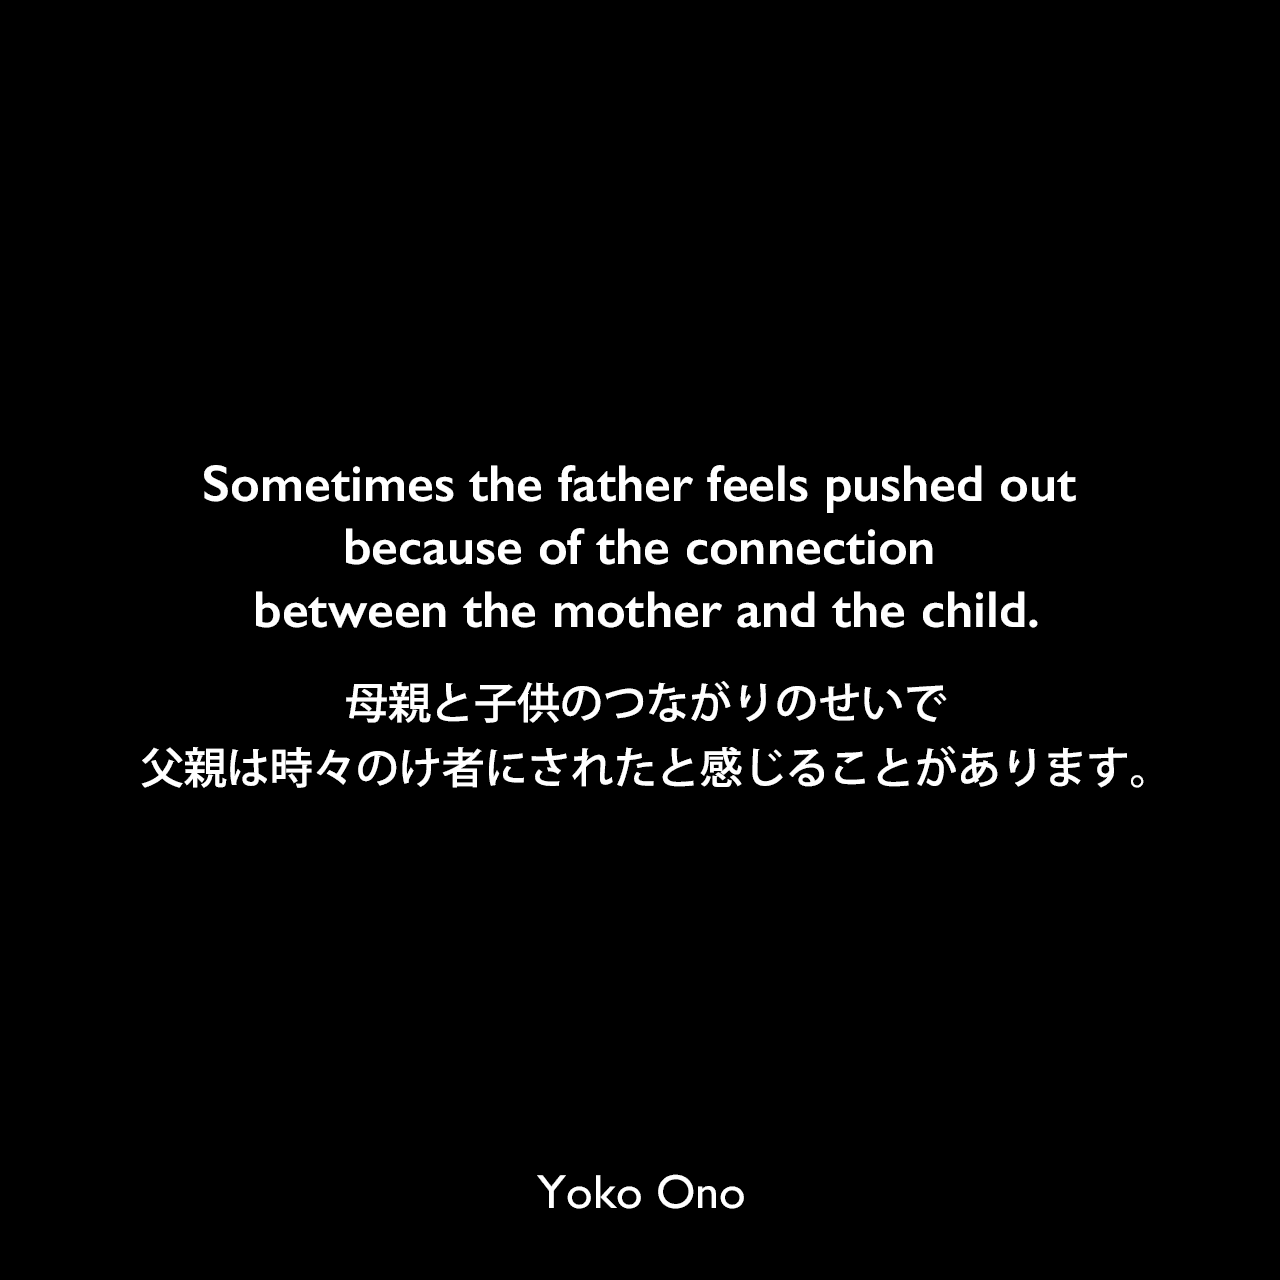 Sometimes the father feels pushed out because of the connection between the mother and the child.母親と子供のつながりのせいで、父親は時々のけ者にされたと感じることがあります。Yoko Ono